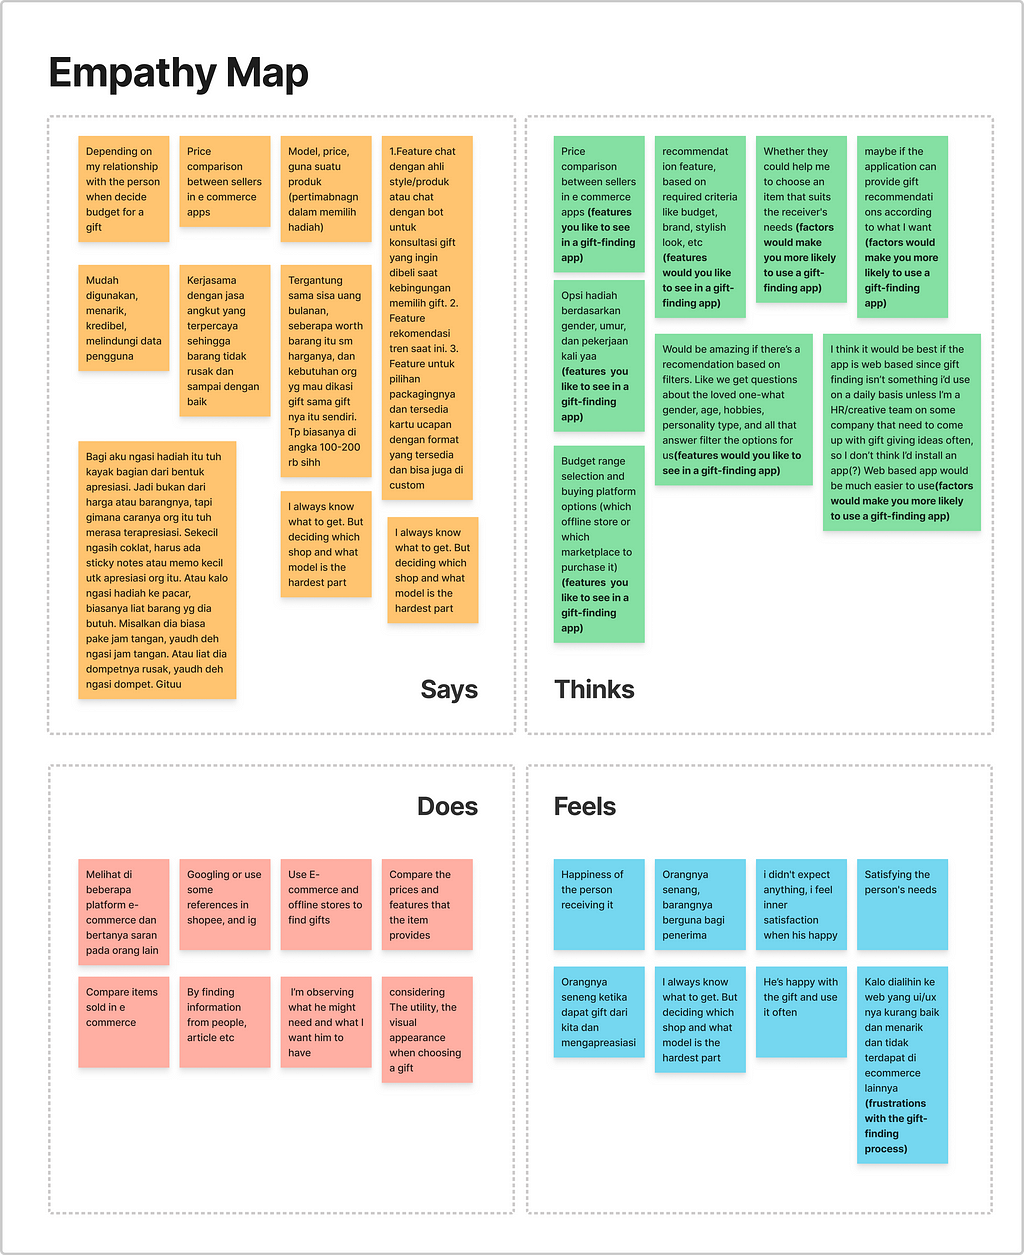 Empathy Map to visualize user behavior. It has four sections: Syas, Thinks, Does and Feels